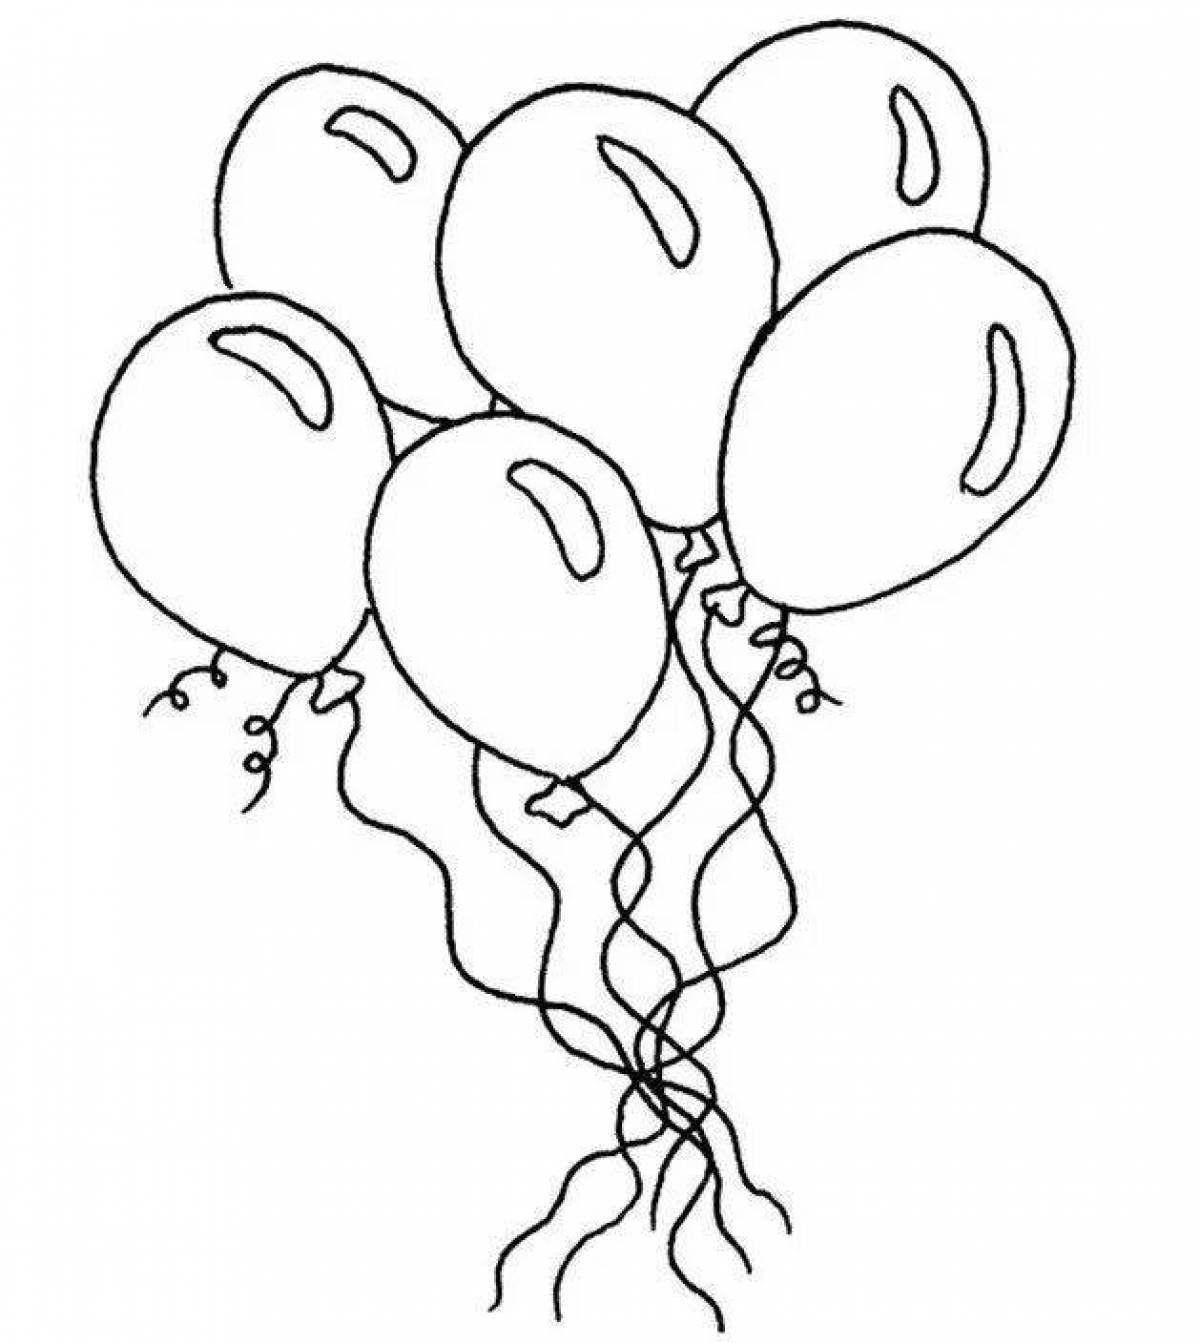 Great birthday balloon coloring pages